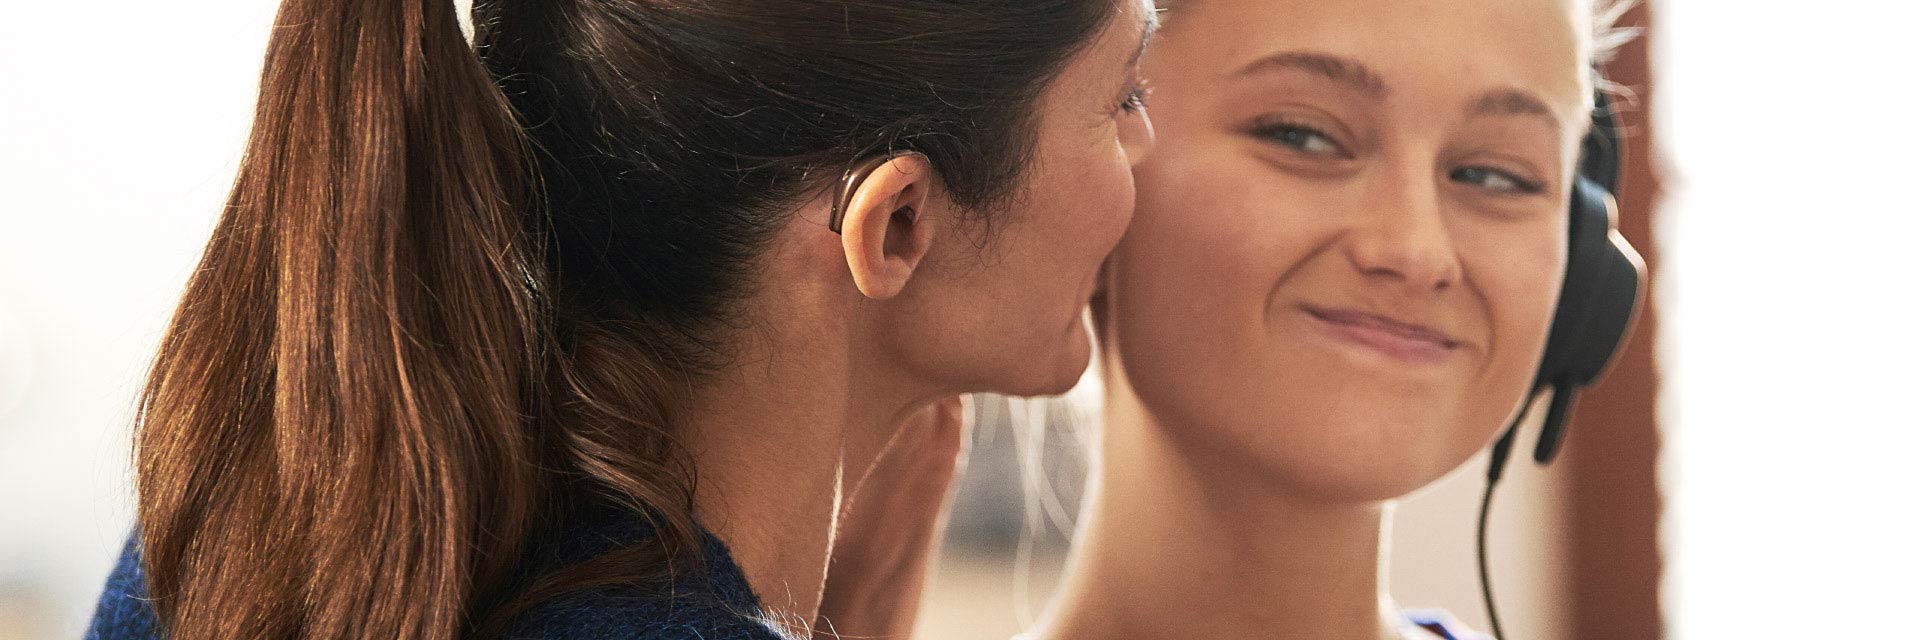 Image shows woman with hearing aid in her ear and girl smiling at each other 